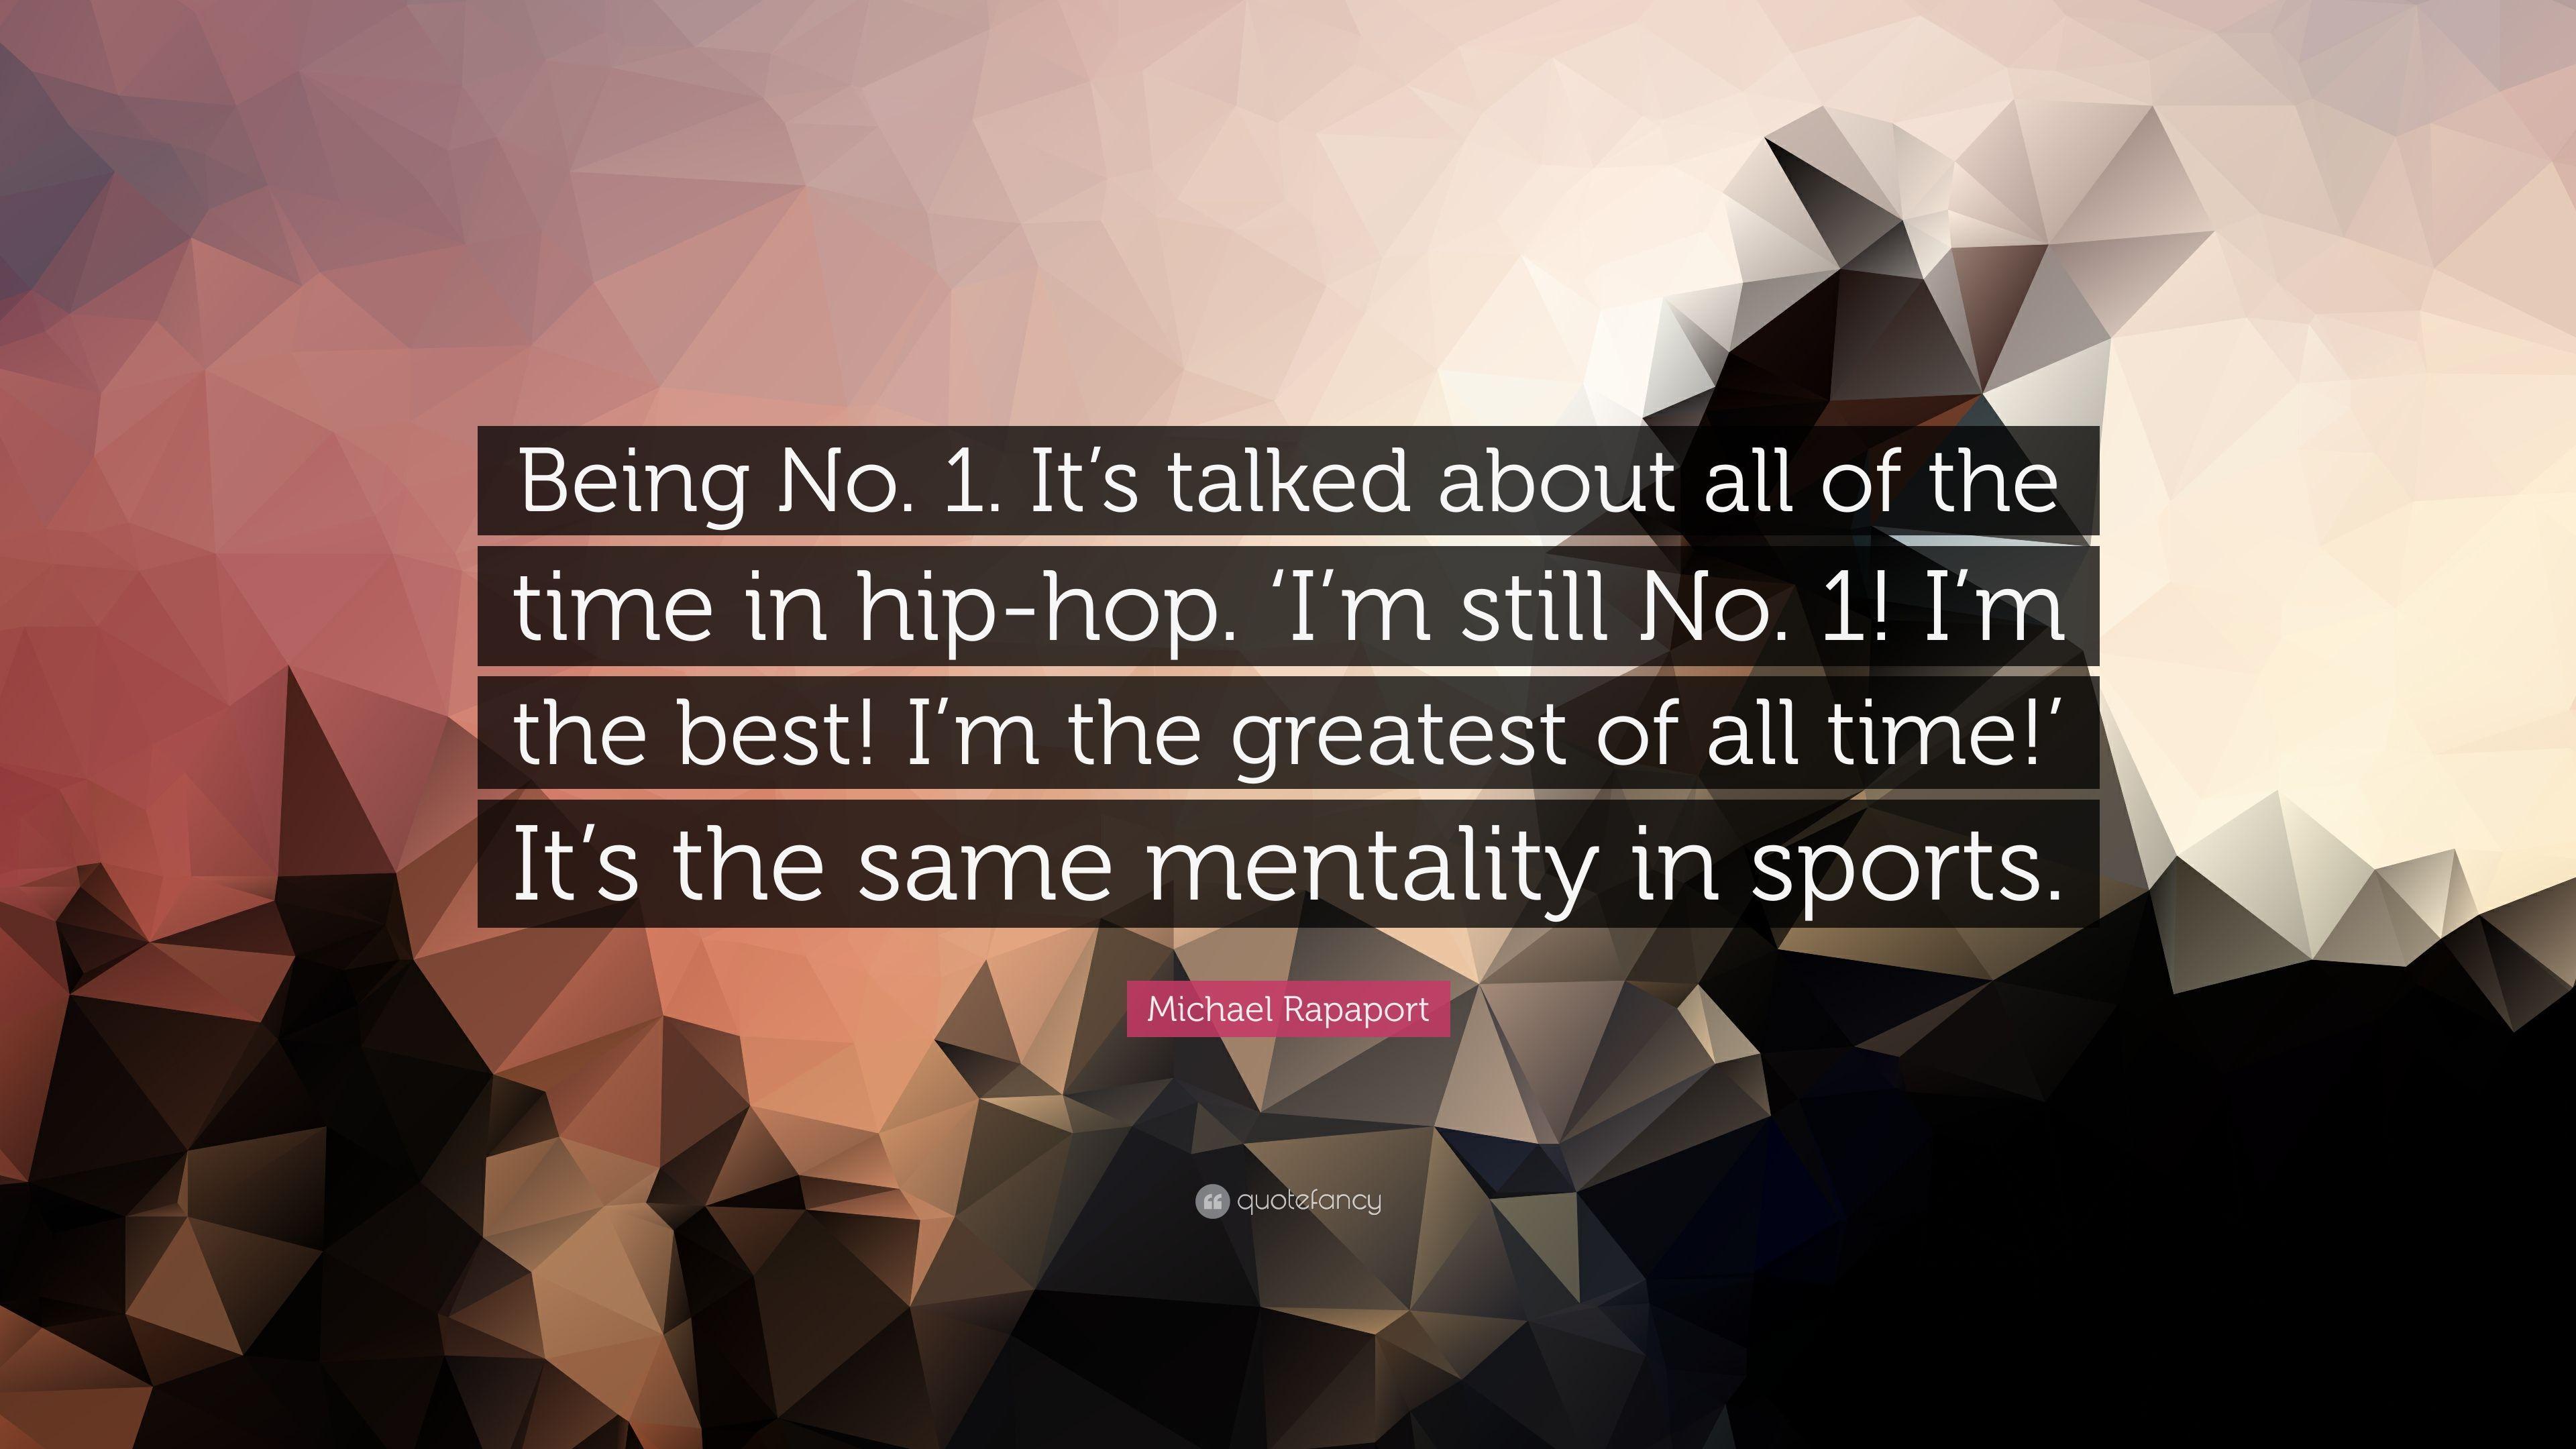 Michael Rapaport Quote: “Being No. 1. It's talked about all